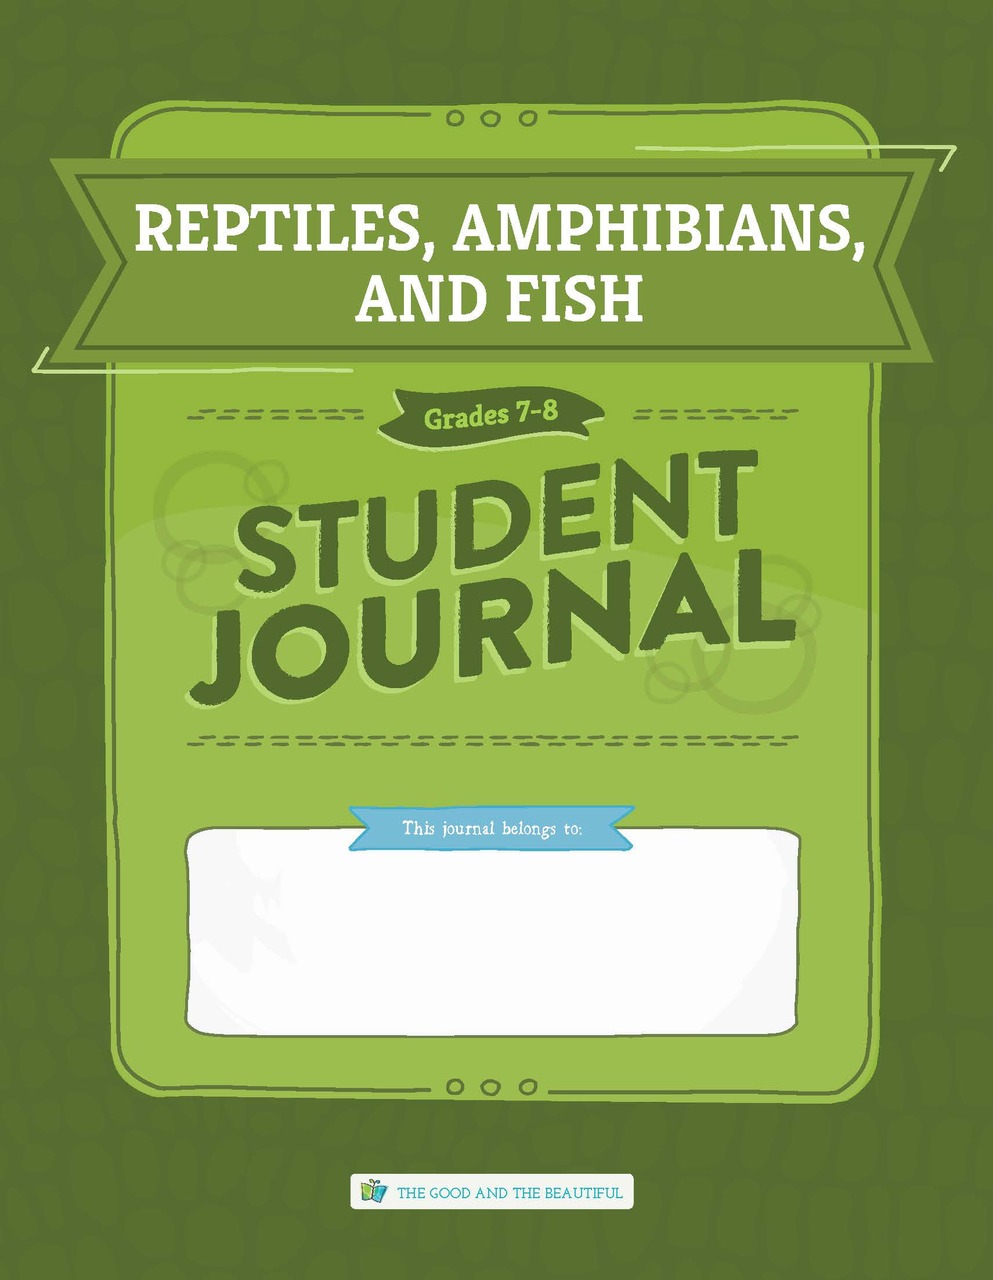 reptiles-amphibians-and-fish-student-journal-grades-7-8-one-per-student-the-good-and-the